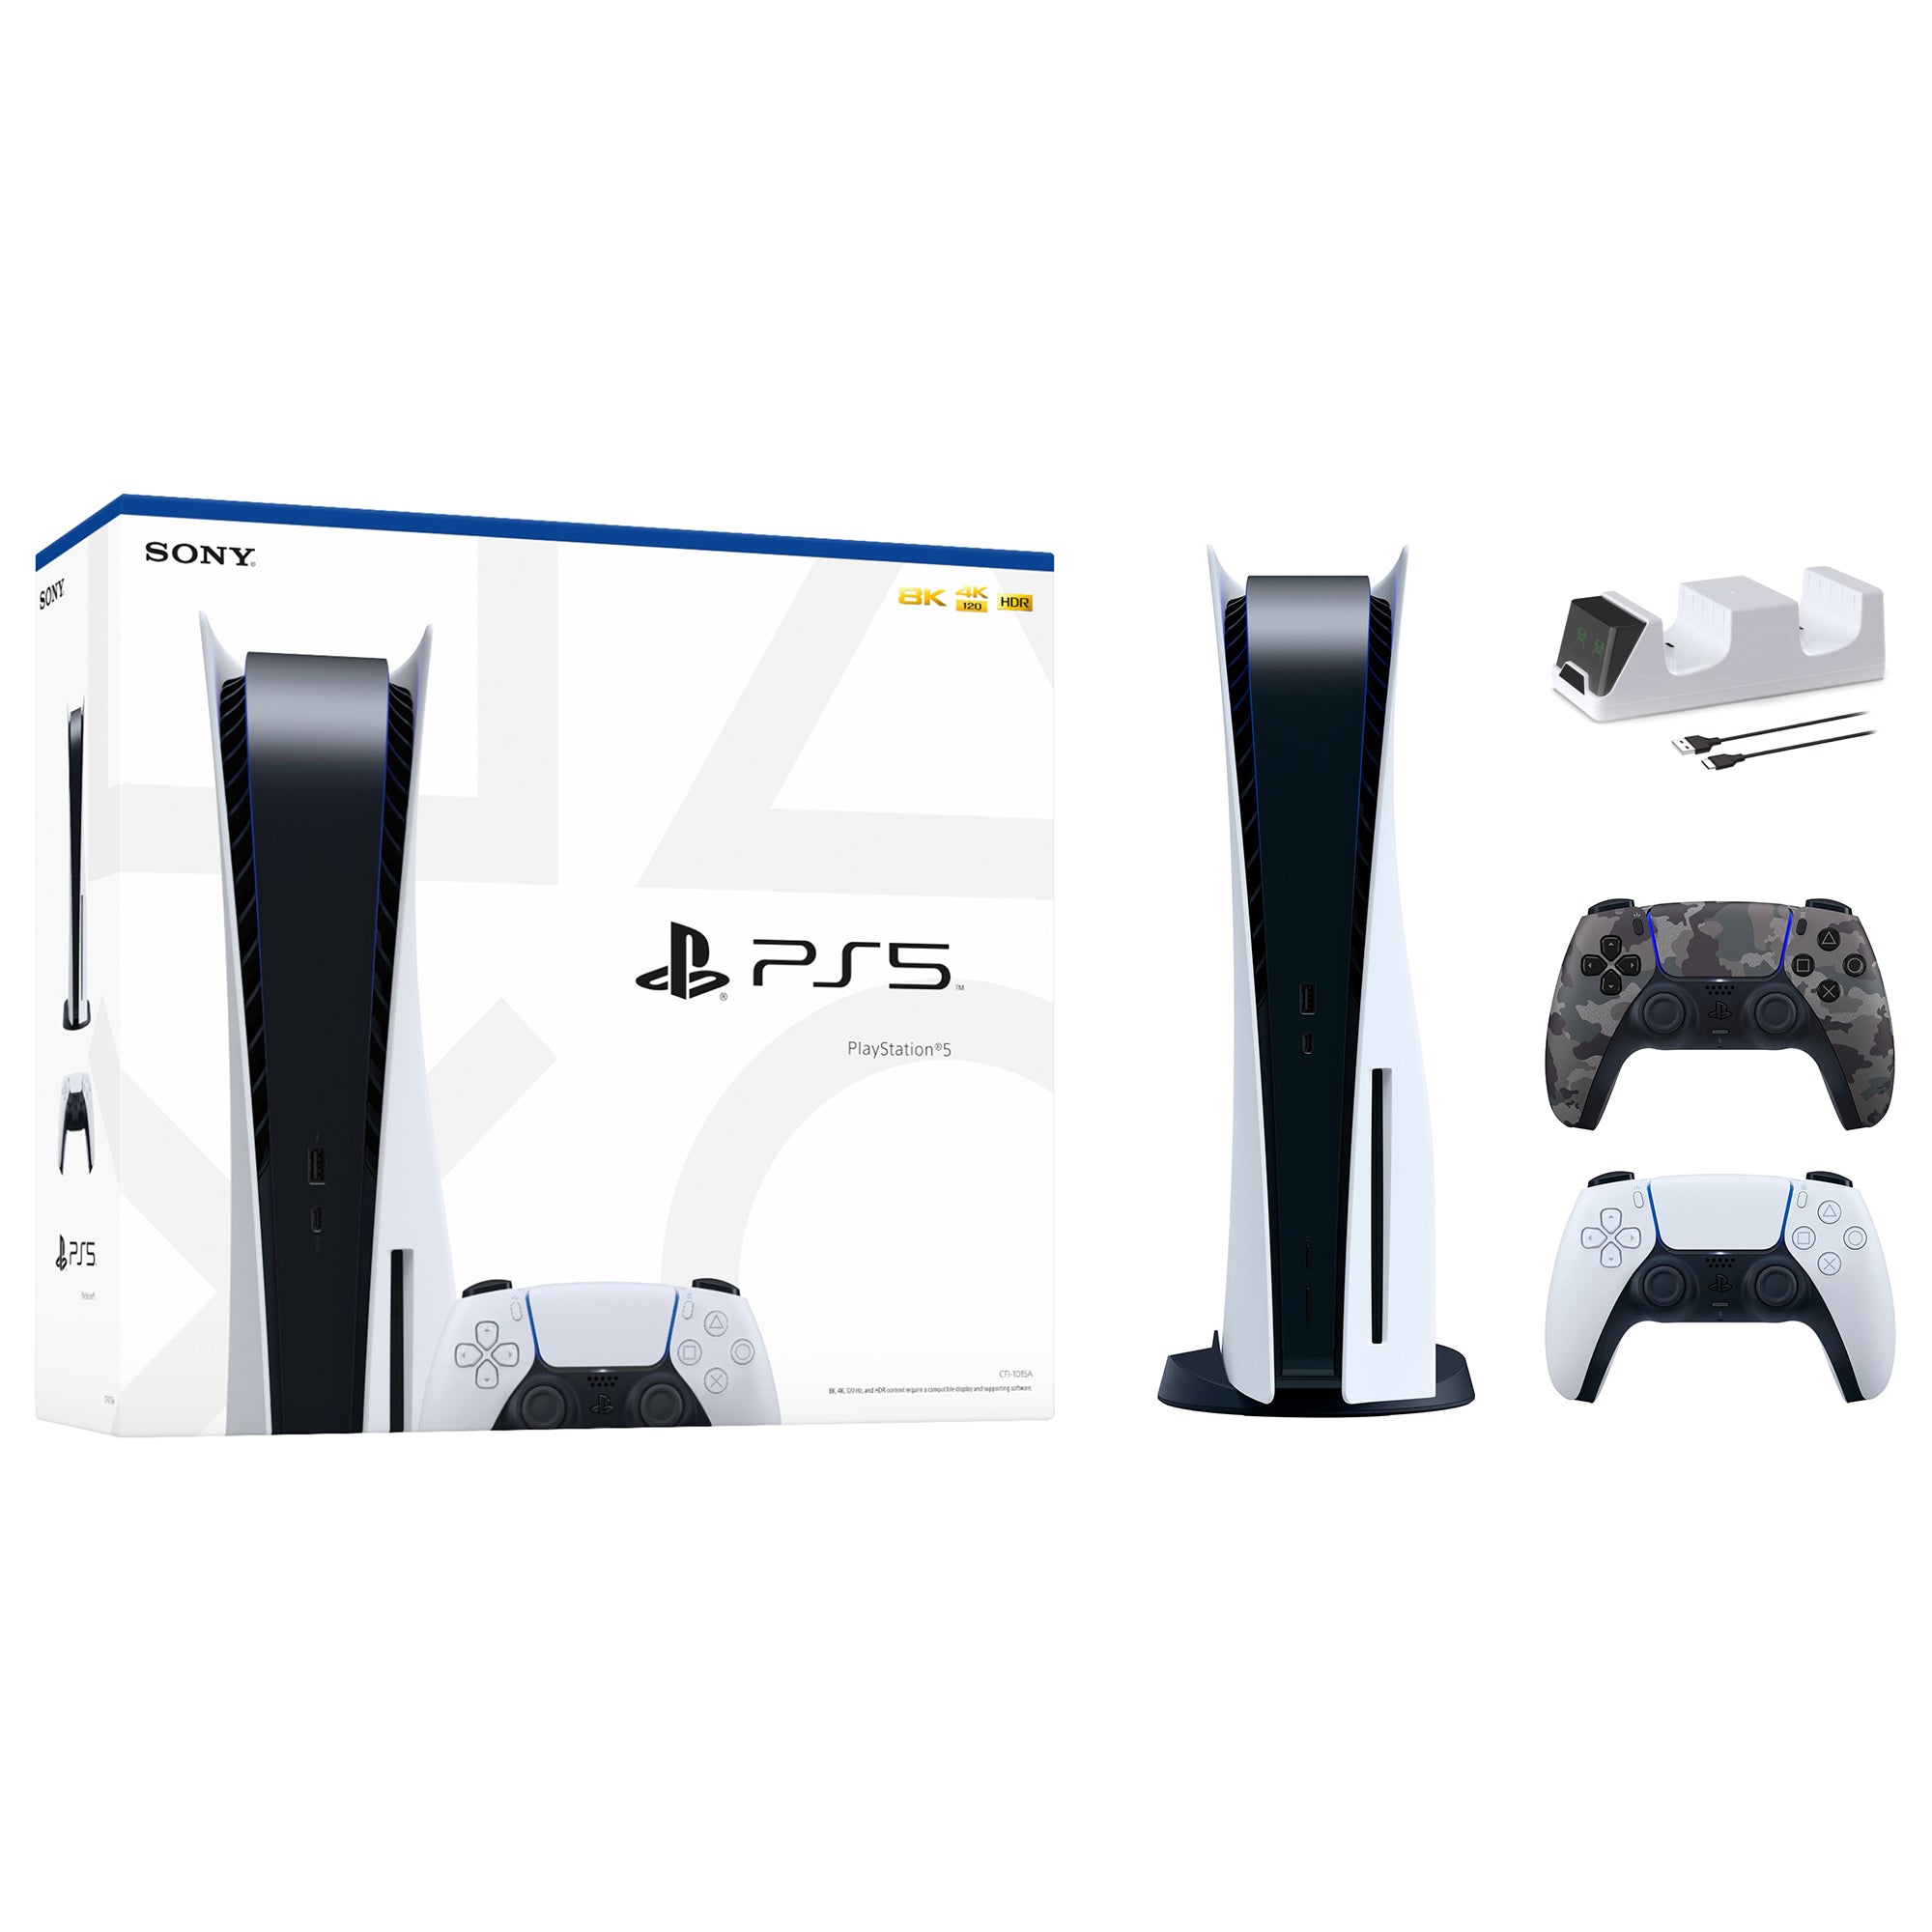 PlayStation 5 Disc Edition with Two Controllers White and Gray Camouflage DualSense and Mytrix Dual Controller Charger - PS5 Gaming Console